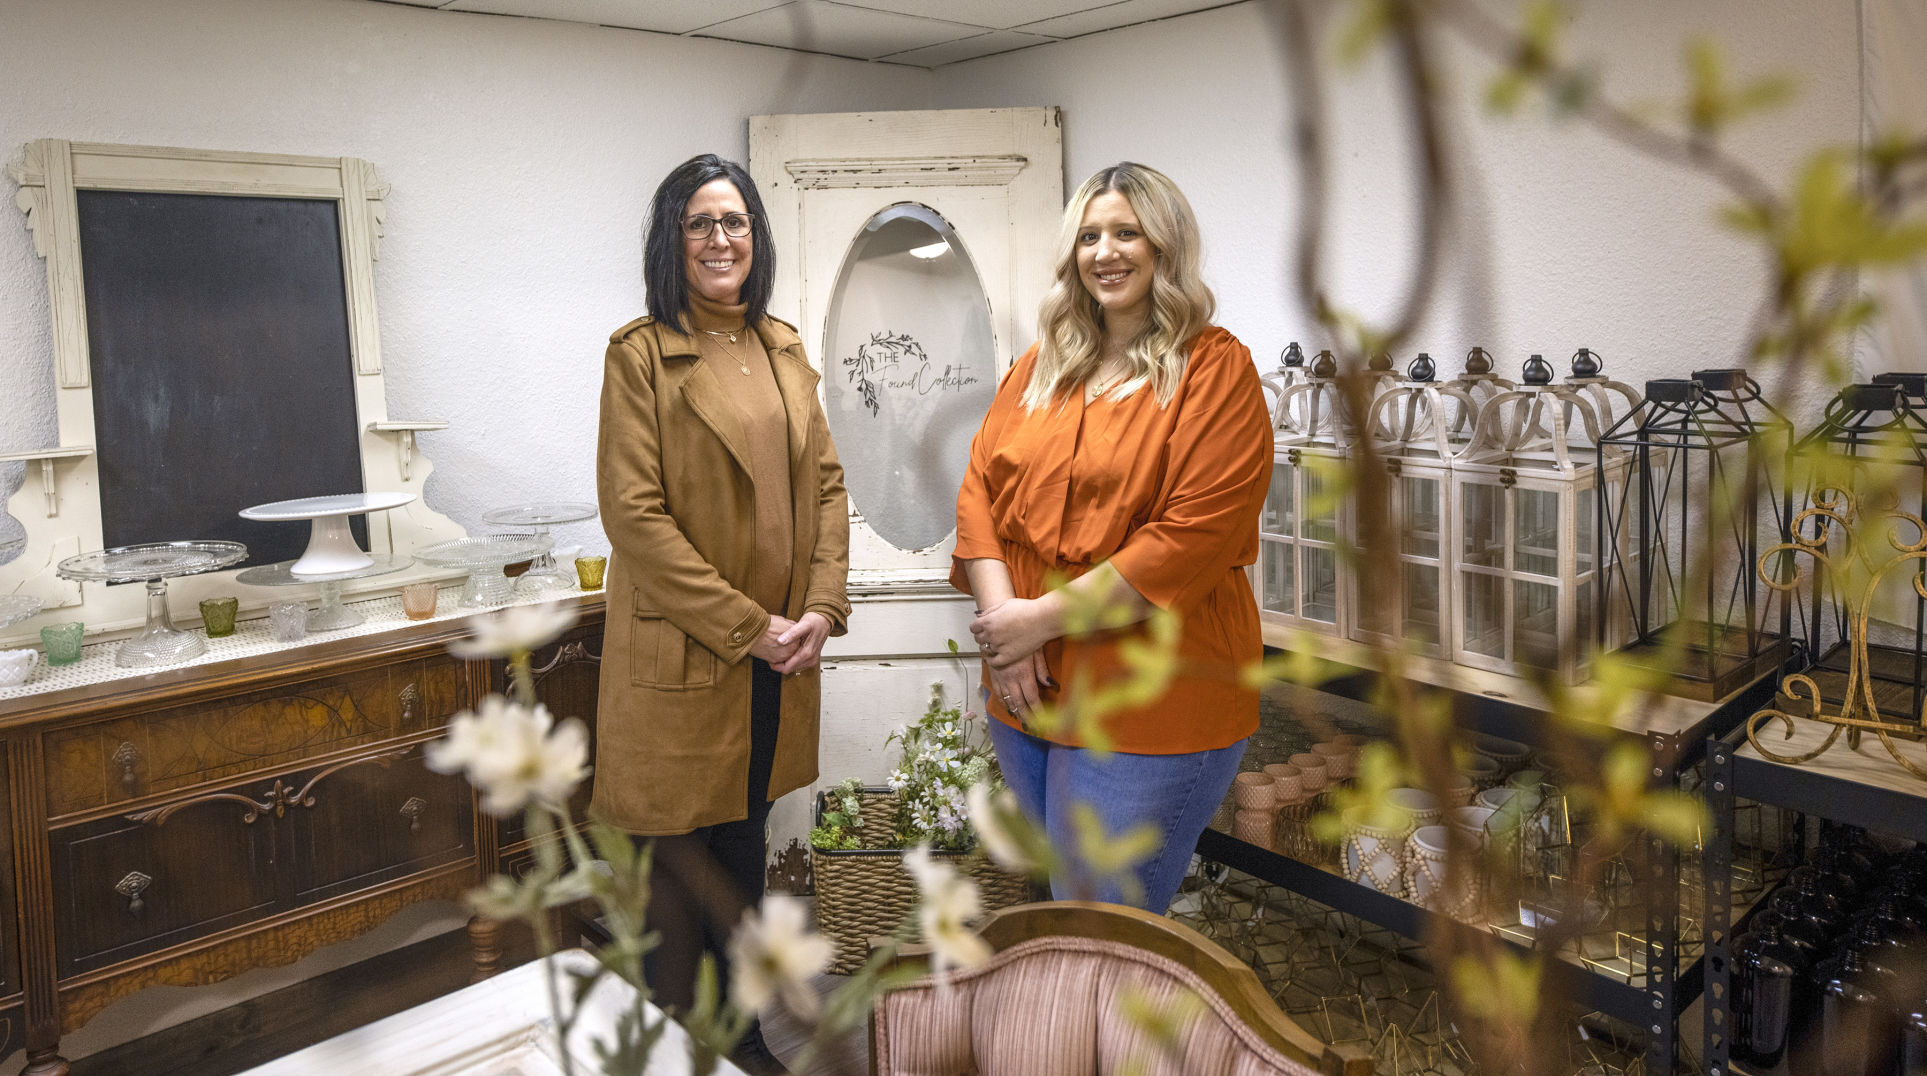 Annette Green (left) and her daughter, Brittany McCullough, operate The Found Collection in Cascade, Iowa. The business specializes in wedding and special occasion decor that can be rented. PHOTO CREDIT: Jacob Fiscus